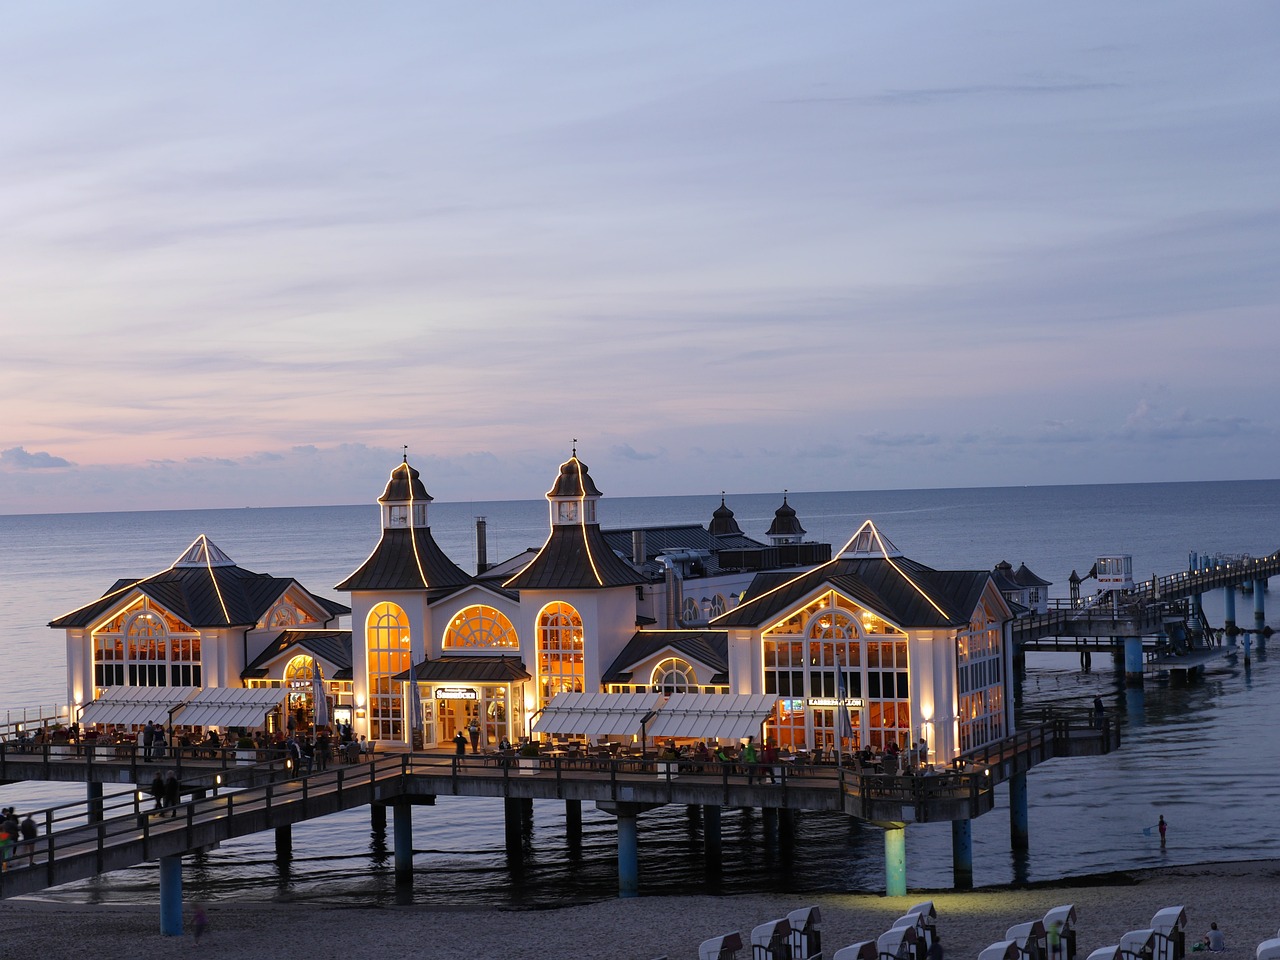 a group of people standing on top of a pier next to a body of water, by Juergen von Huendeberg, pixabay, art nouveau, restaurant in background, sitting on the beach at night, seaside victorian building, lower saxony